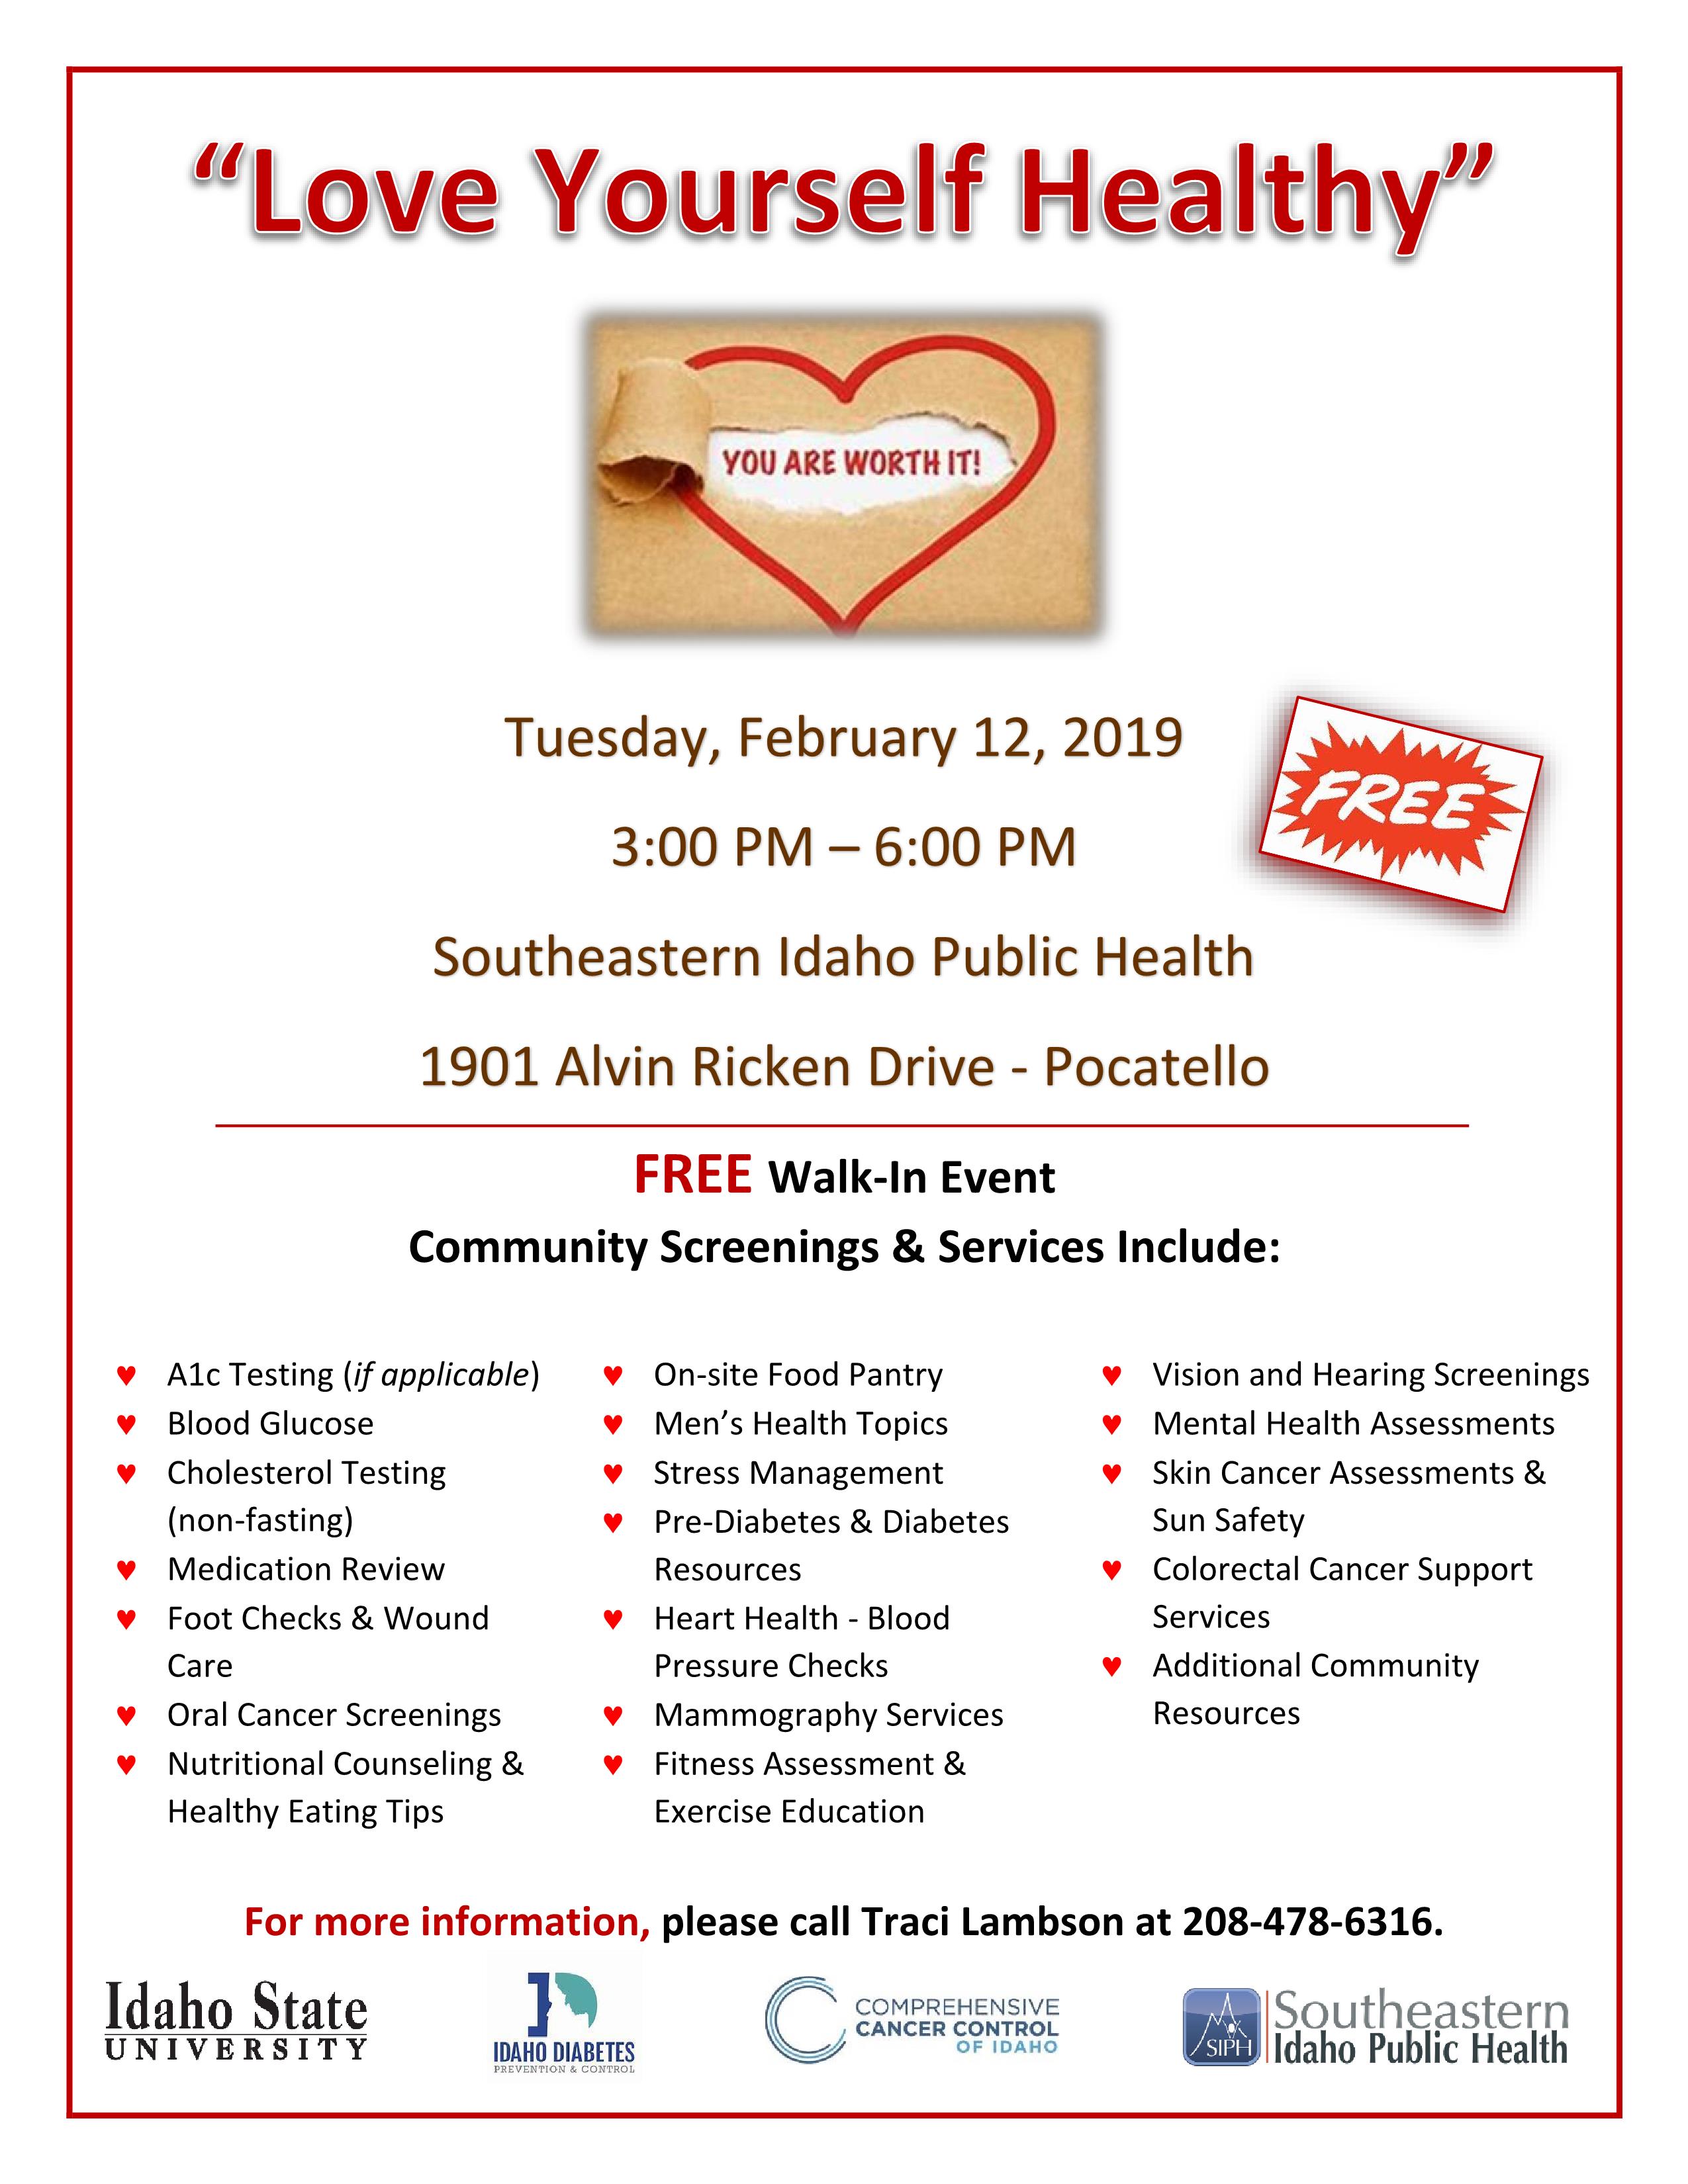 Love Yourself Healthy” Free Walk-in Event & in Pocatello @ SIPH Shoshone-Bannock Tribes